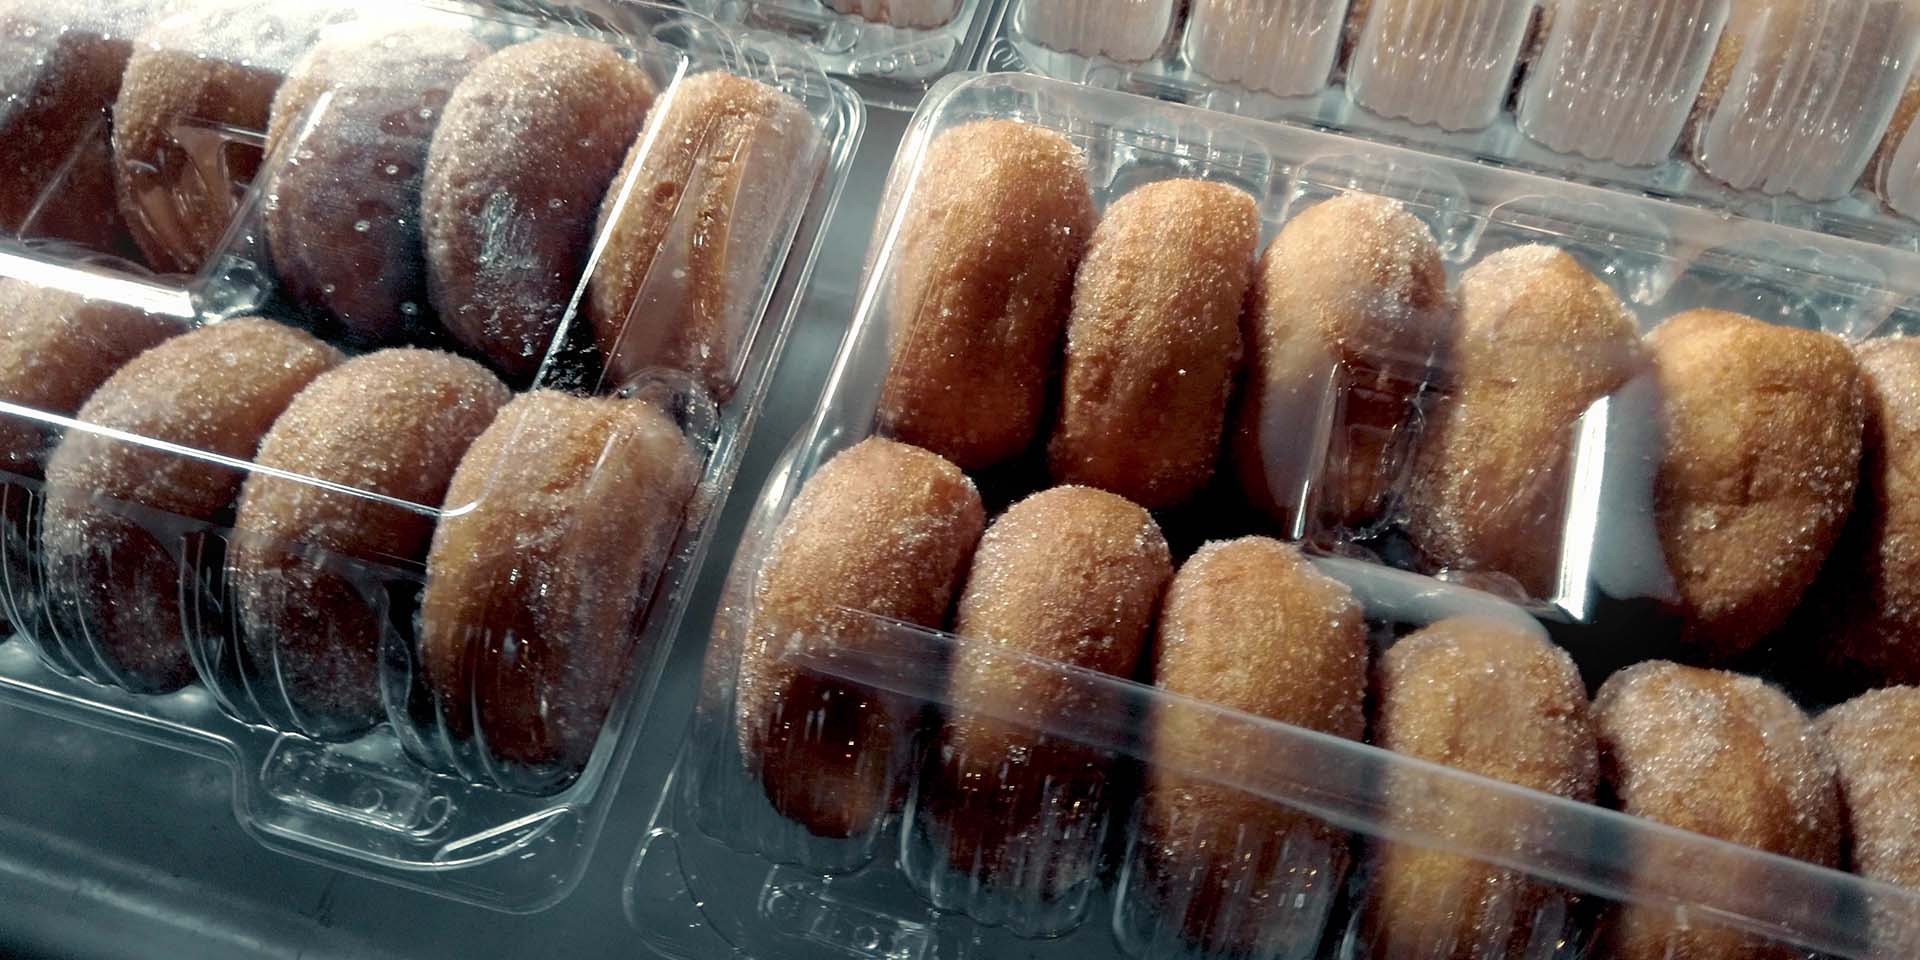 Cider donuts in packages